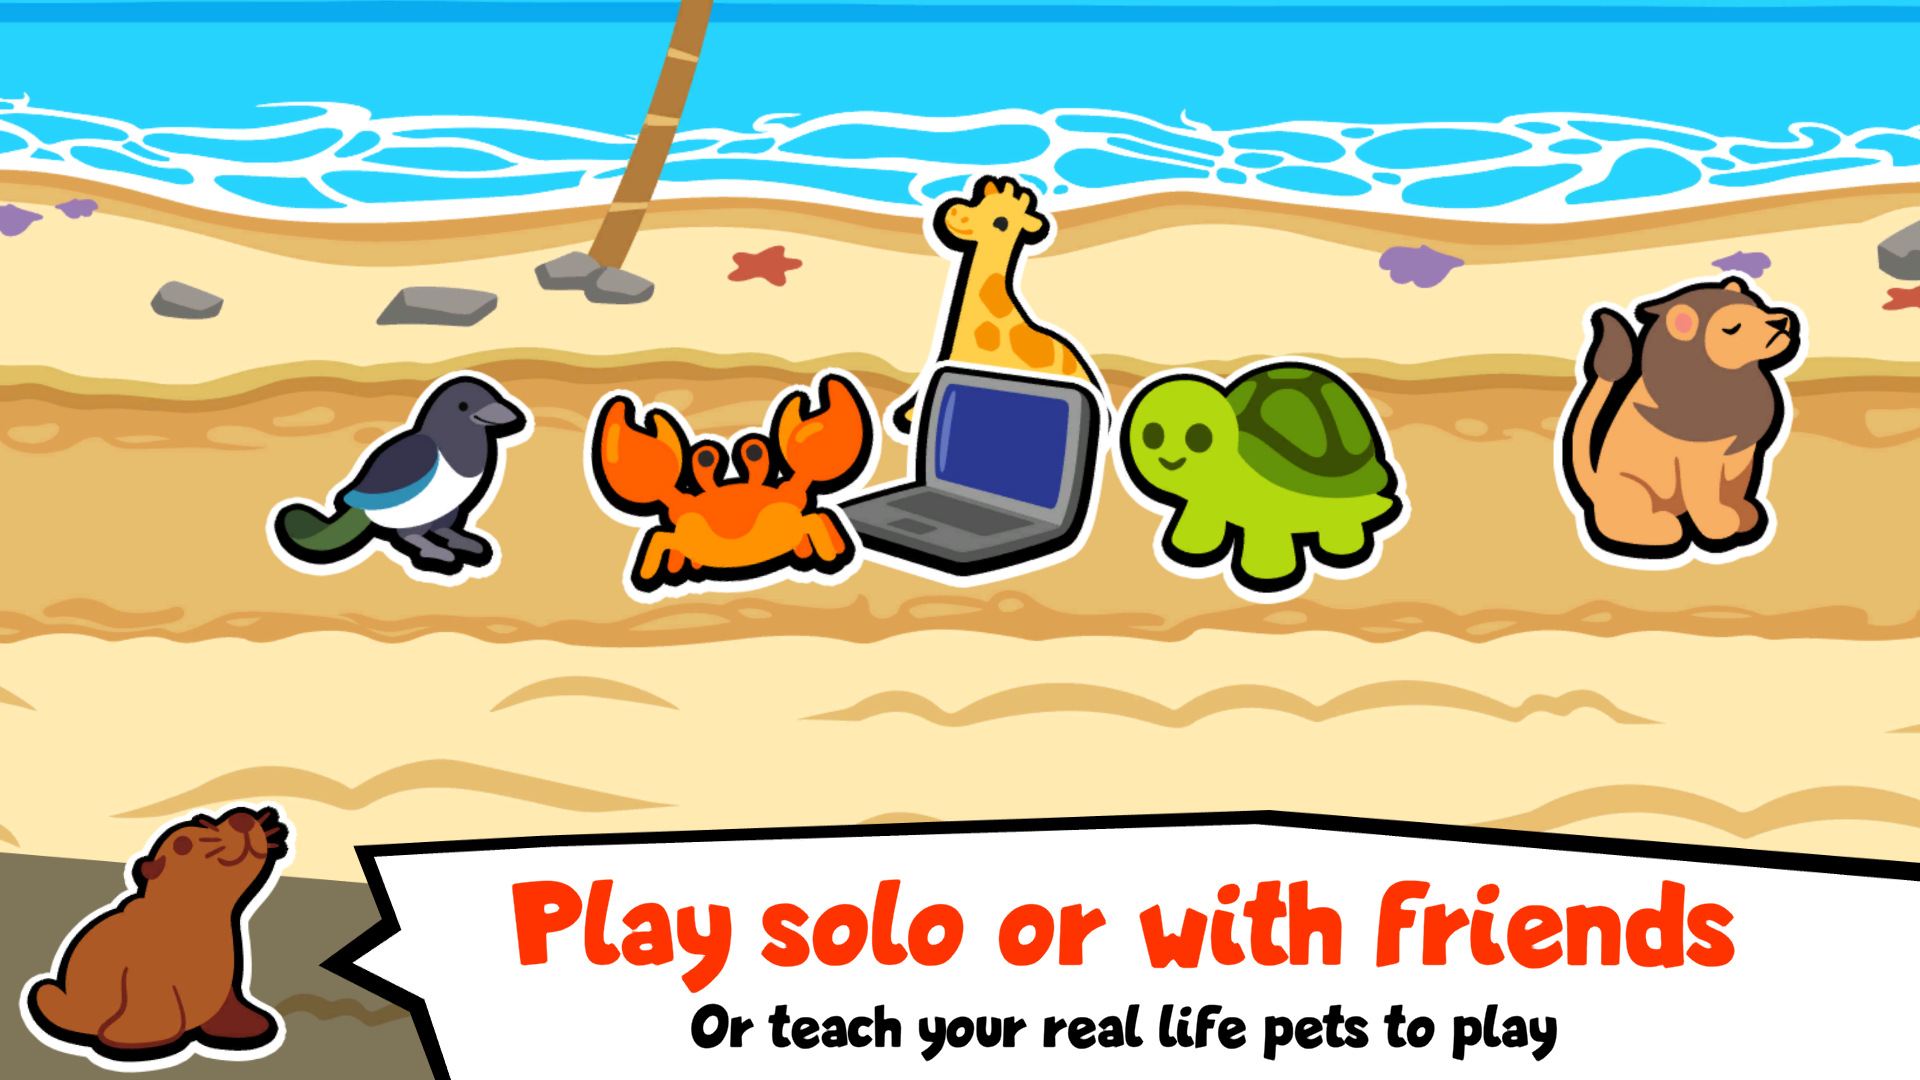 Play solo or with friends - Or teach your real life pets to play